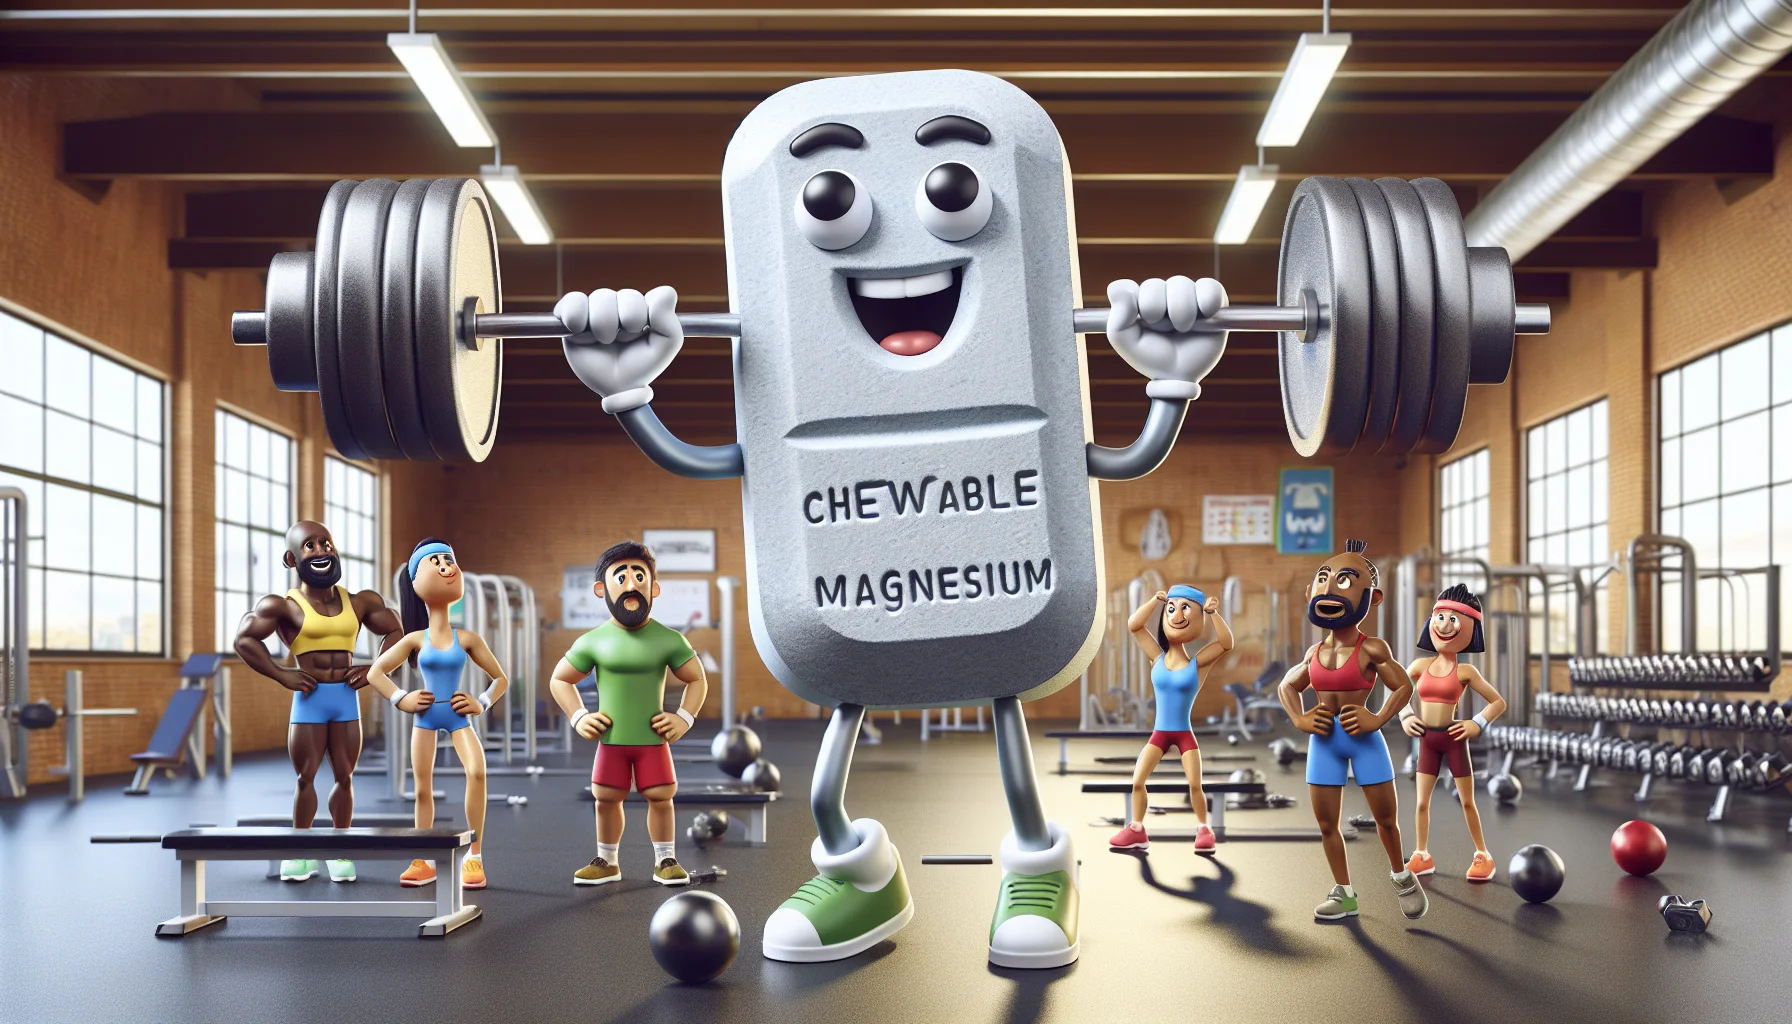 Imagine a humorous depiction of a gym scenario. In the center, there's a large chewable magnesium tablet with cartoonish arms and legs. It is energetically lifting a barbell, showcasing strength and vigor, embodying the benefits of magnesium supplements for sports fitness. The backdrop is a typical gym with various sports equipment and spaces for workout. There are amused faces of a diverse group of fitness enthusiasts belonging to different descents such as Asian, African, Hispanic, and Caucasian, both male and female, who are watching the tablet in action and looking motivated.